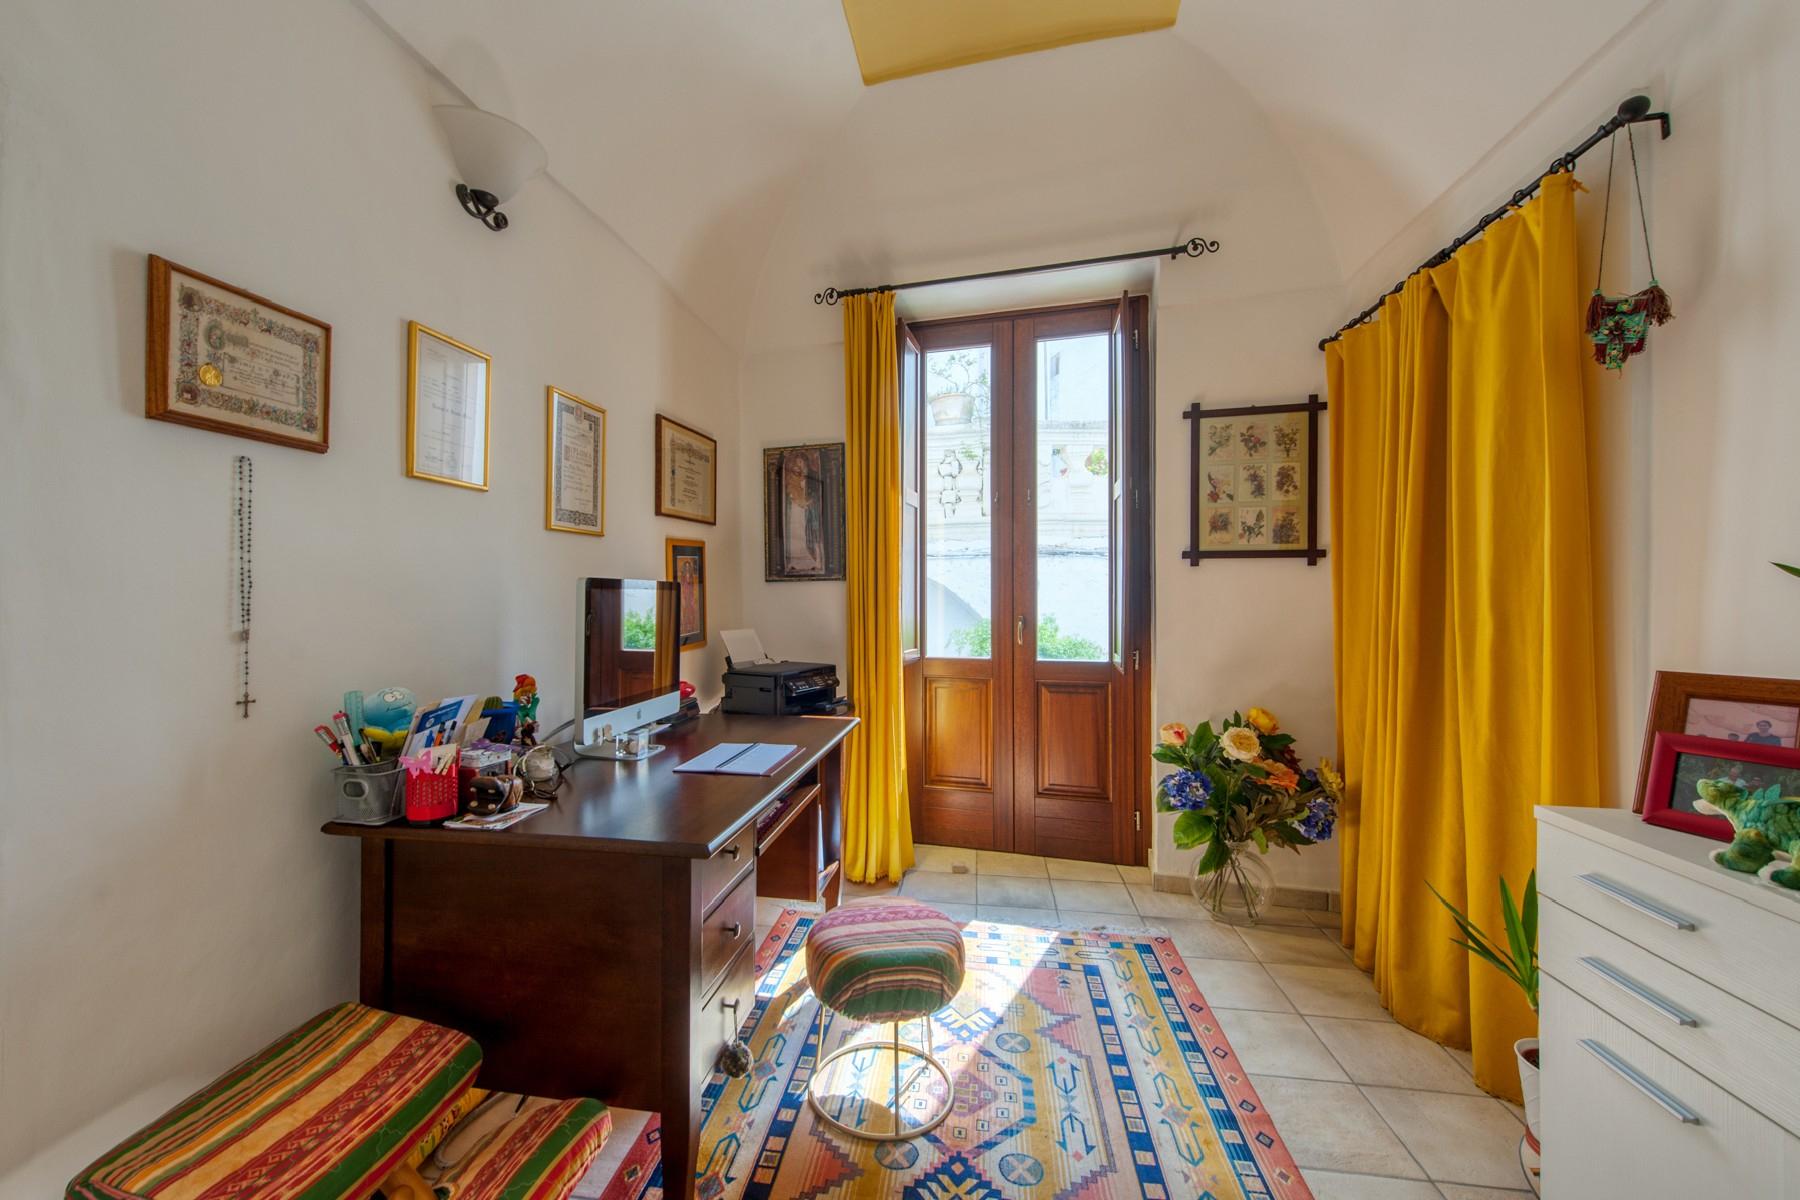 Perfectly renovated Palazzetto in the historic center of Parabita - 9